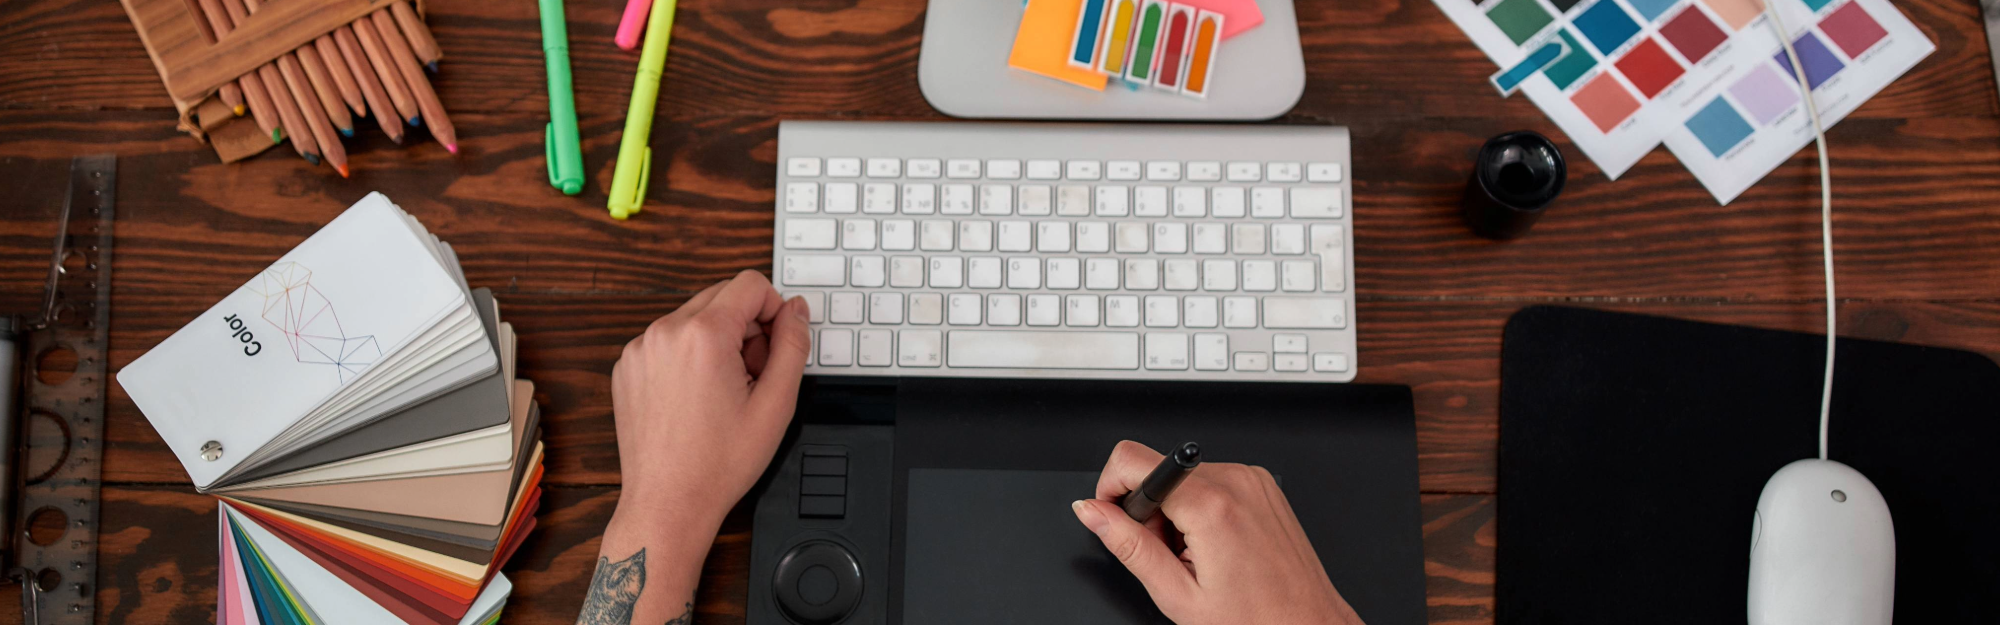 A top-down view of a graphic designer's desk. You see hands poised over a drawing tablet, a keyboard, a computer mouse, and color swatches.